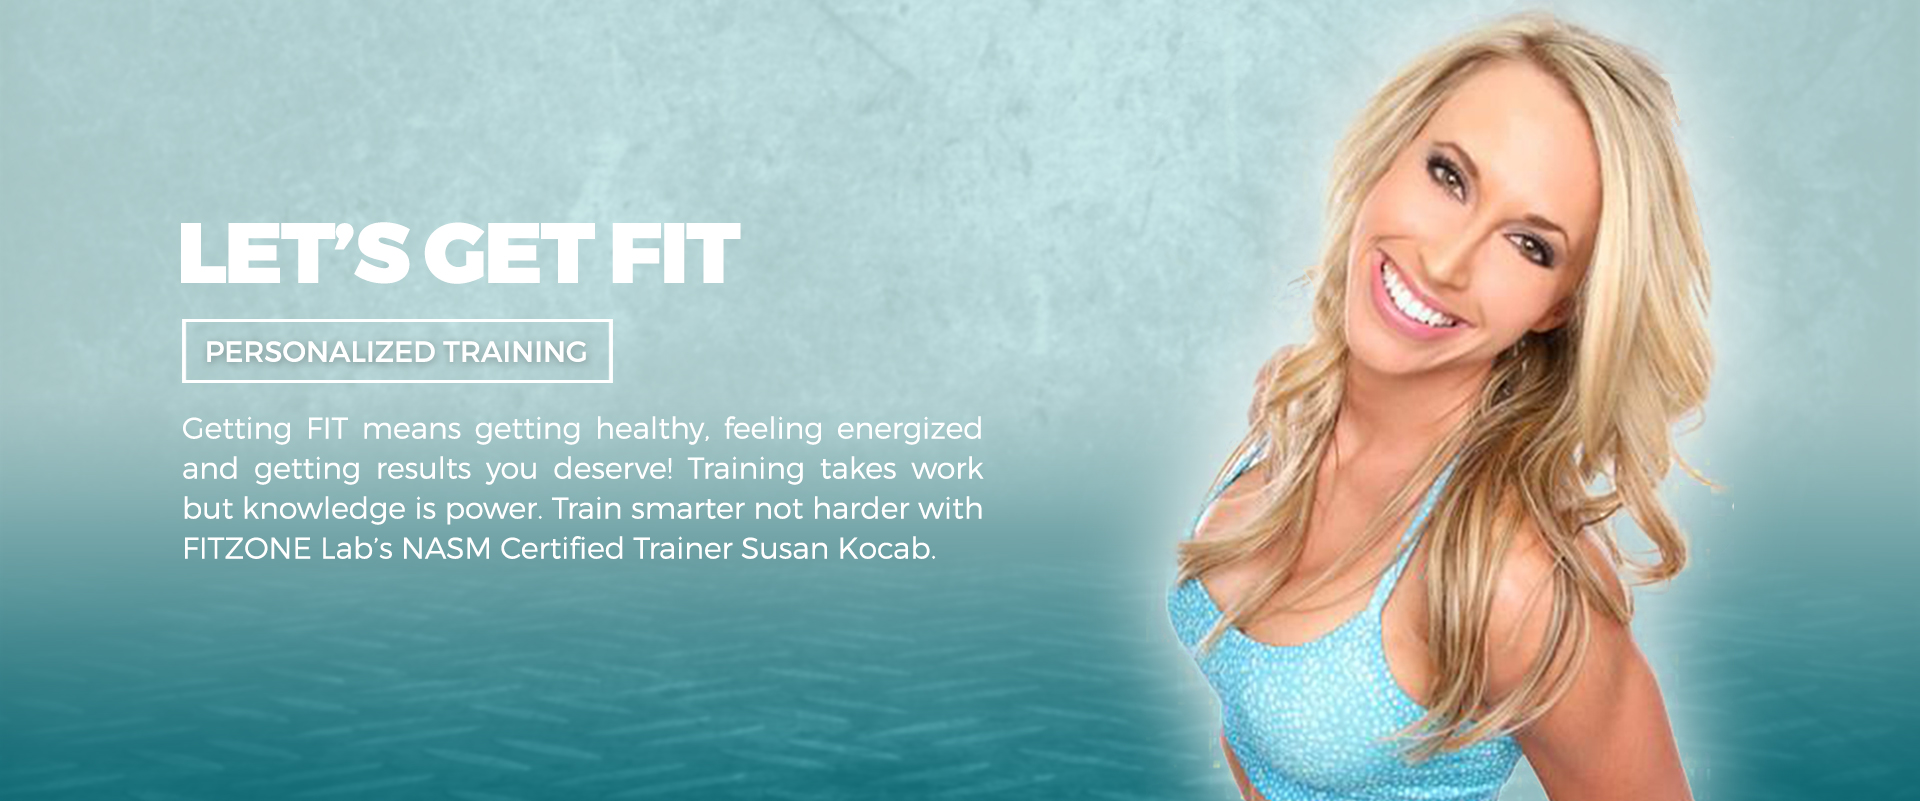 fitzone-homepage-about